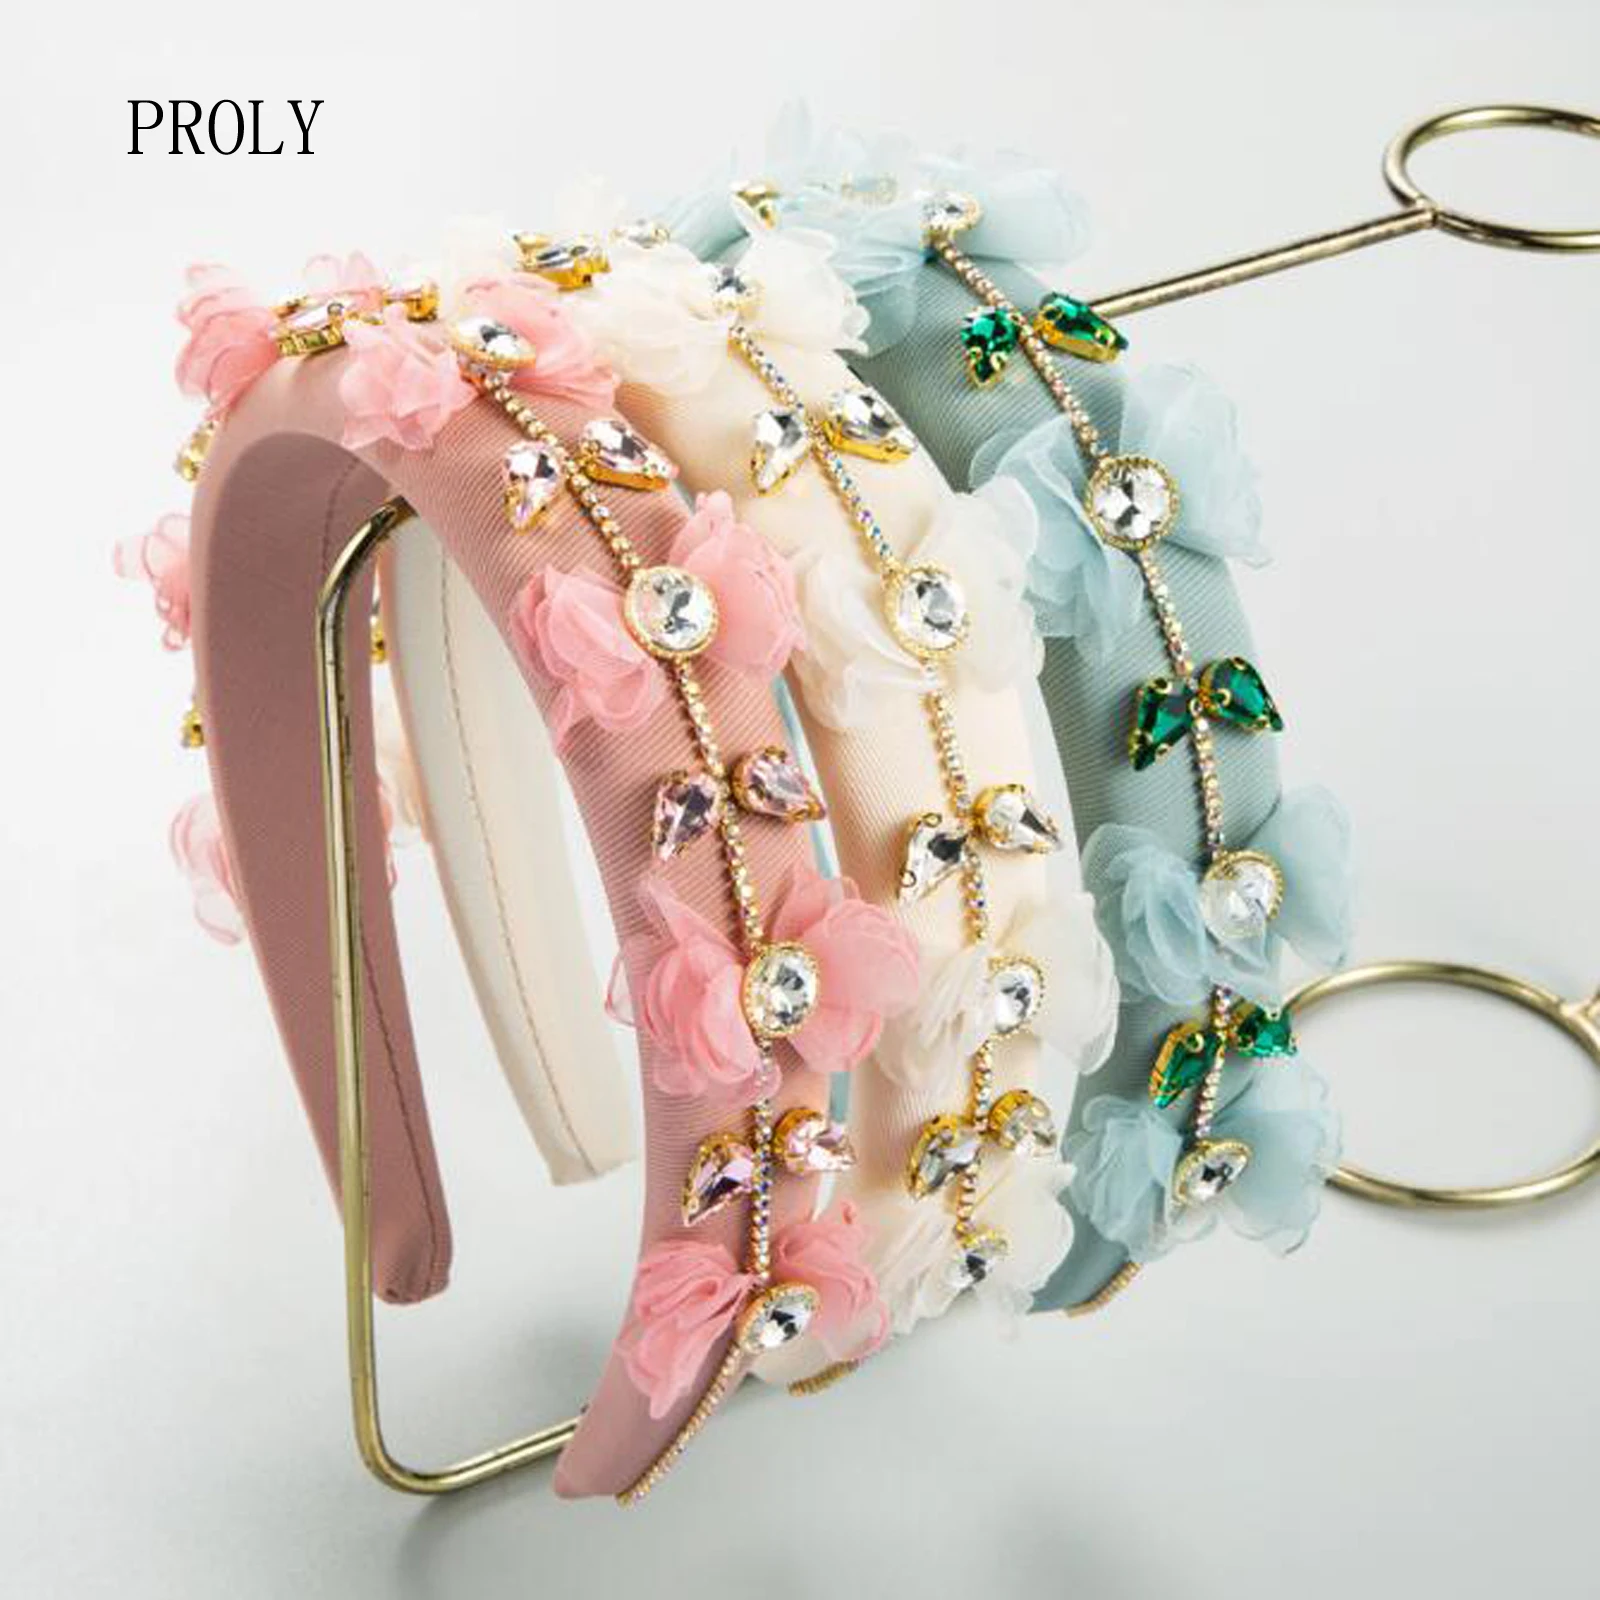 

PROLY New Fashion Headband For Women Top Quality Rhinestone Flower Hairband Light Color Luxurious Baroque Hair Accessories